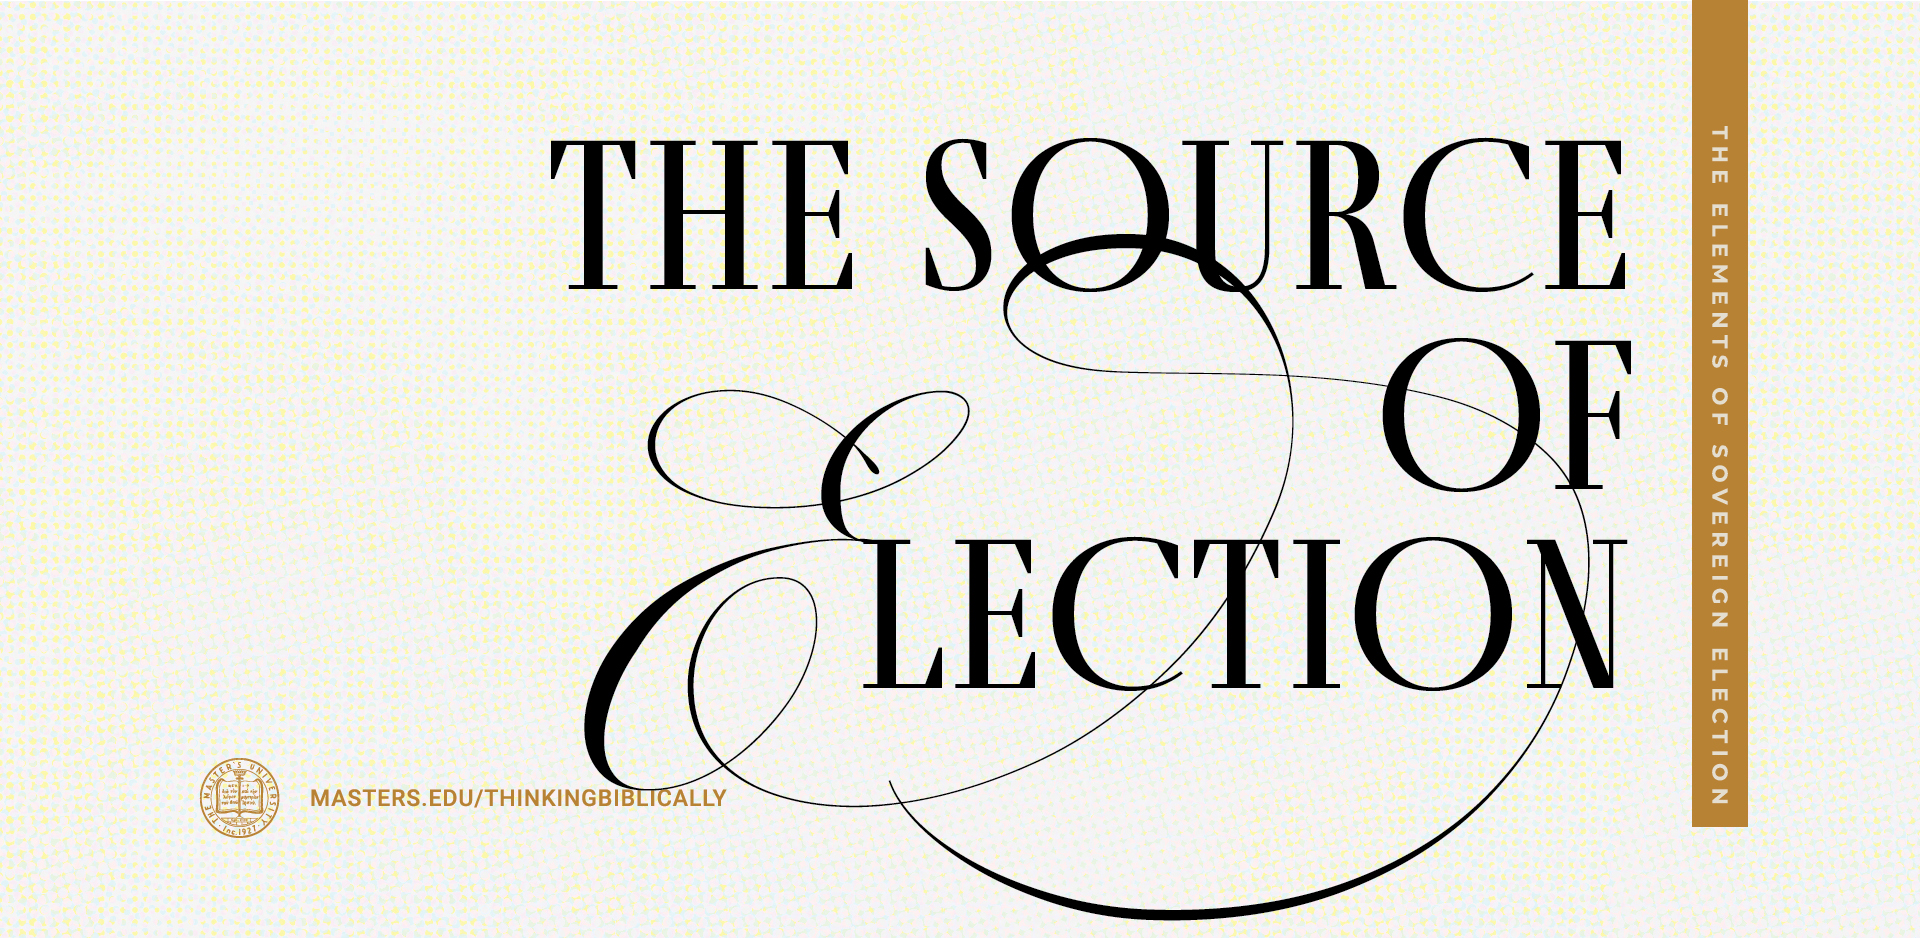 The Source of Election Featured Image